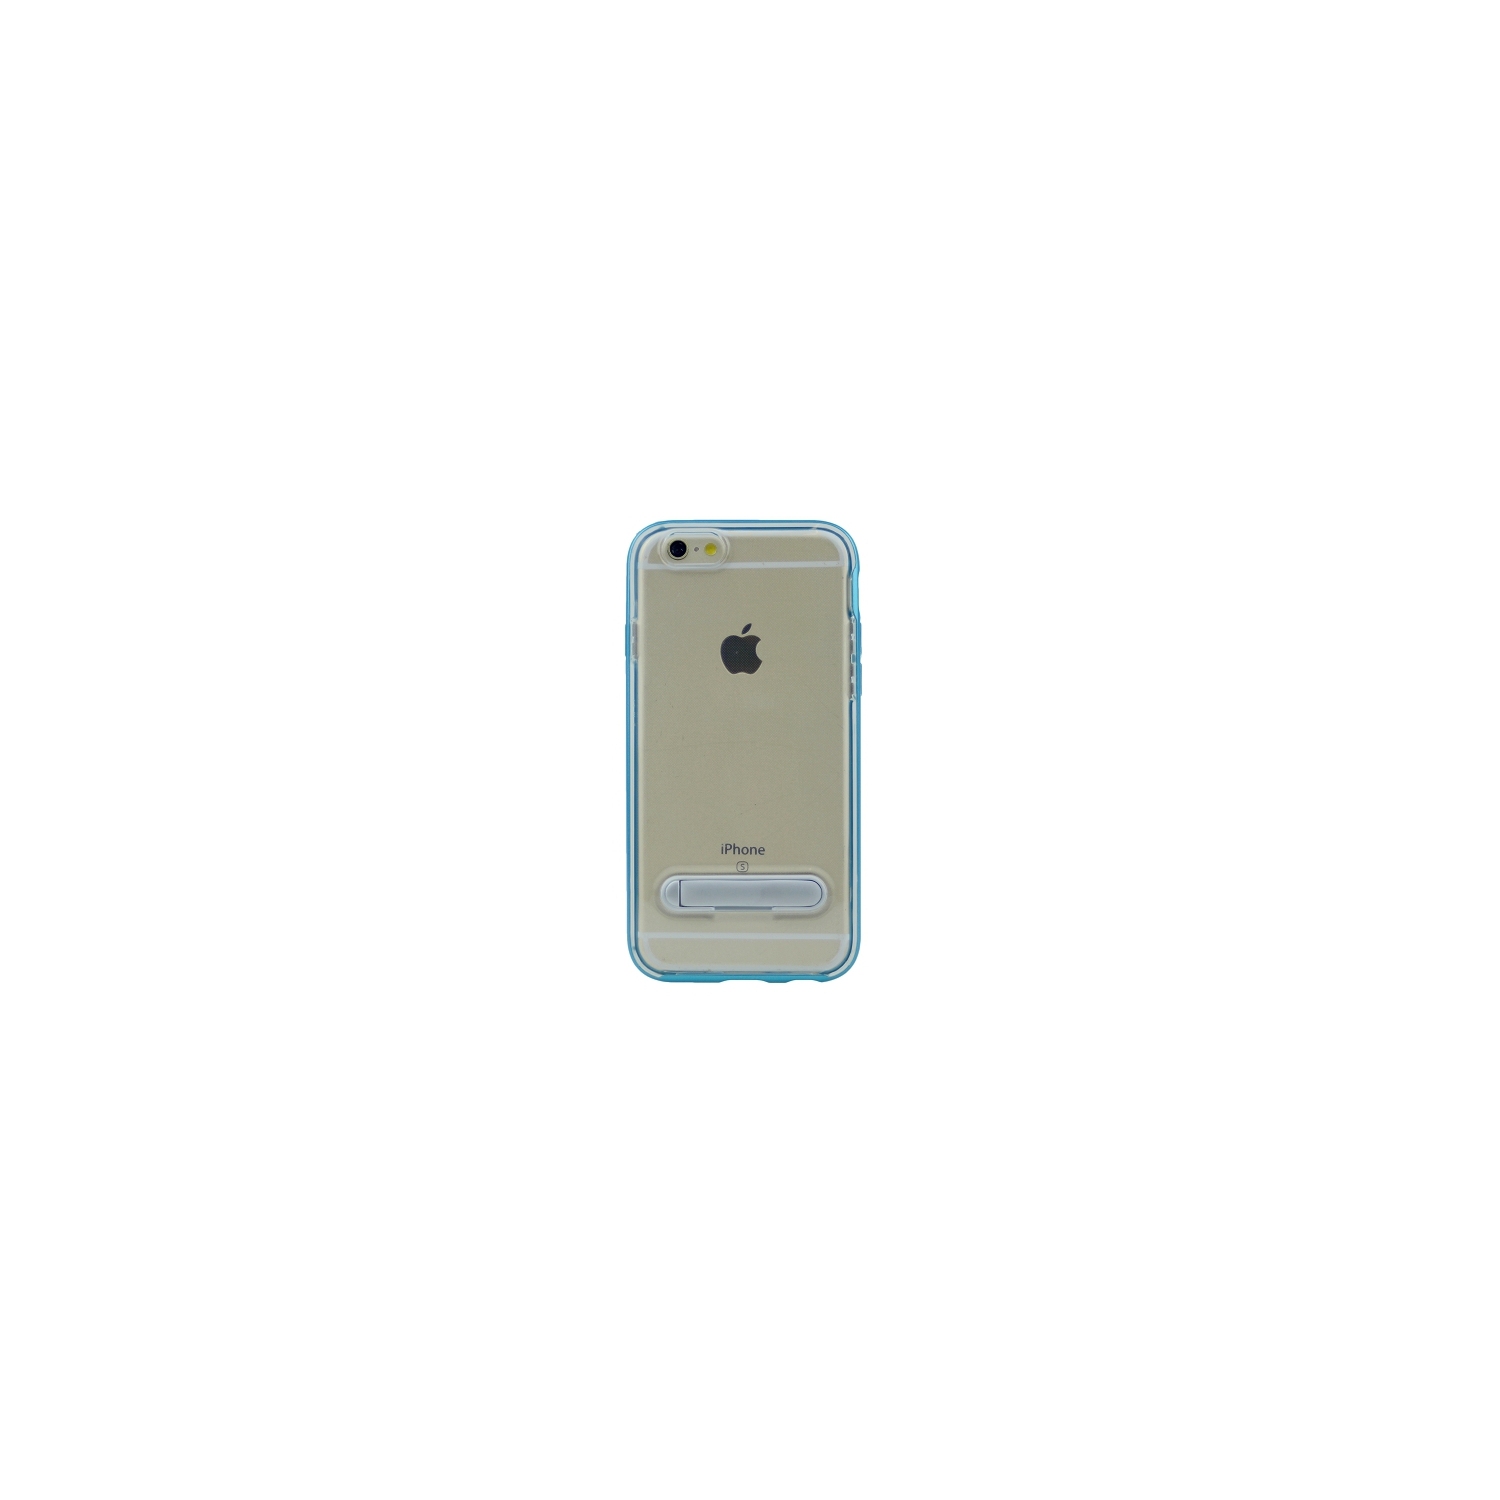 No Package will be included Slim clear tpu+hard frame rubber bumper for Iphone 5/S/SE(2016) with kickstand, Blue